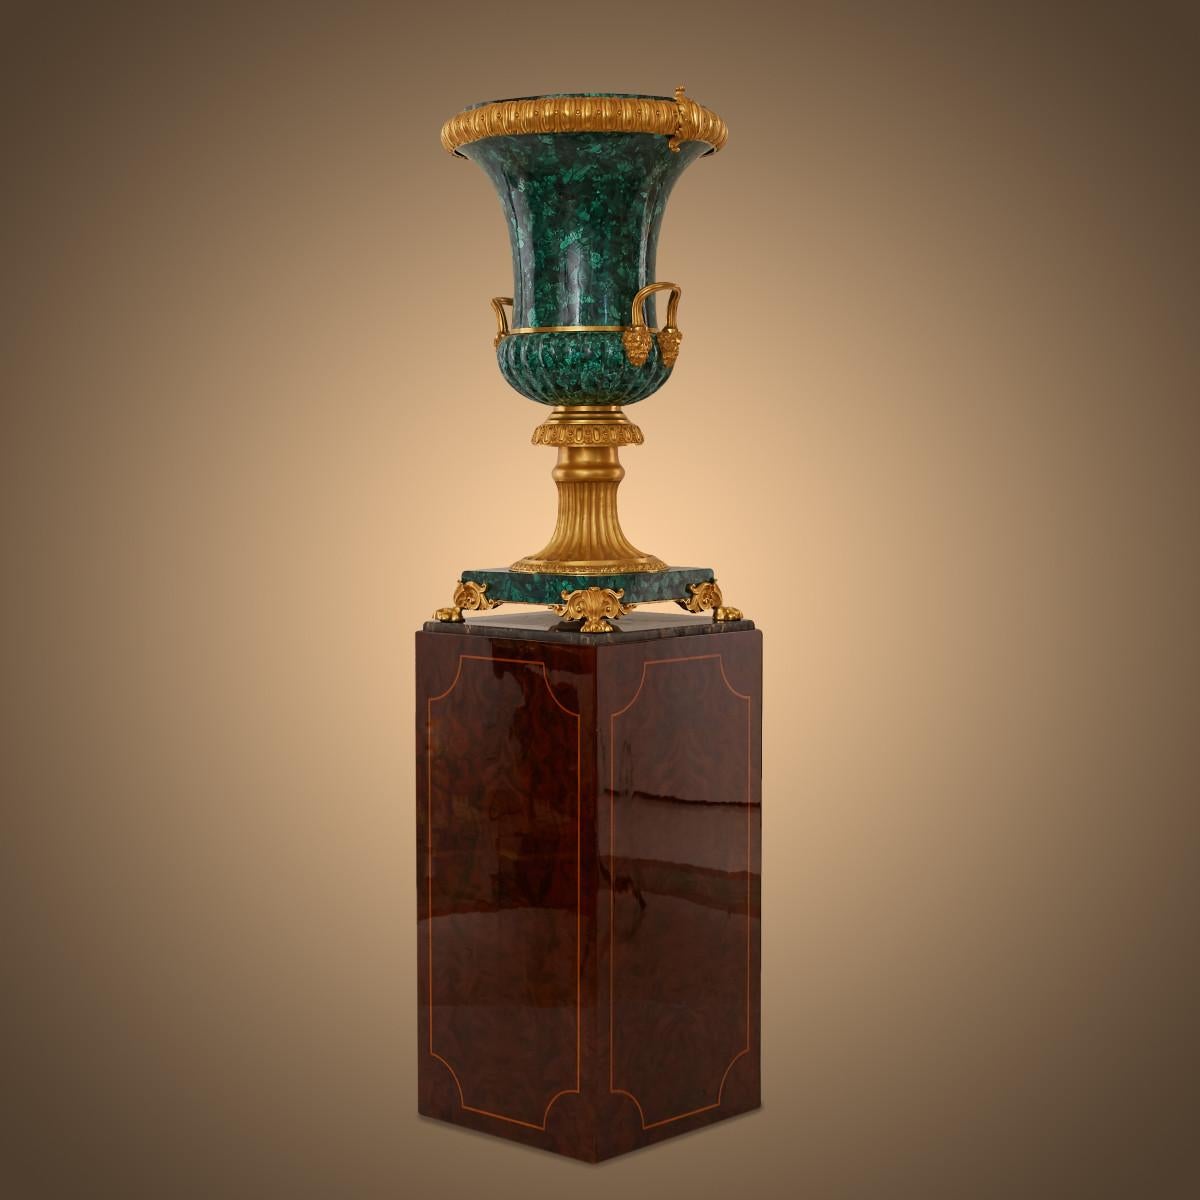 Pair Imperial Russian Malachite and Dore Bronze Hermitage Vases, This malachite vase has a marble base and gilt metal mountings. It is one of a pair exhibited by the Russian Government at the International Exhibition of 1851. Dr. Ludmila Budrina of